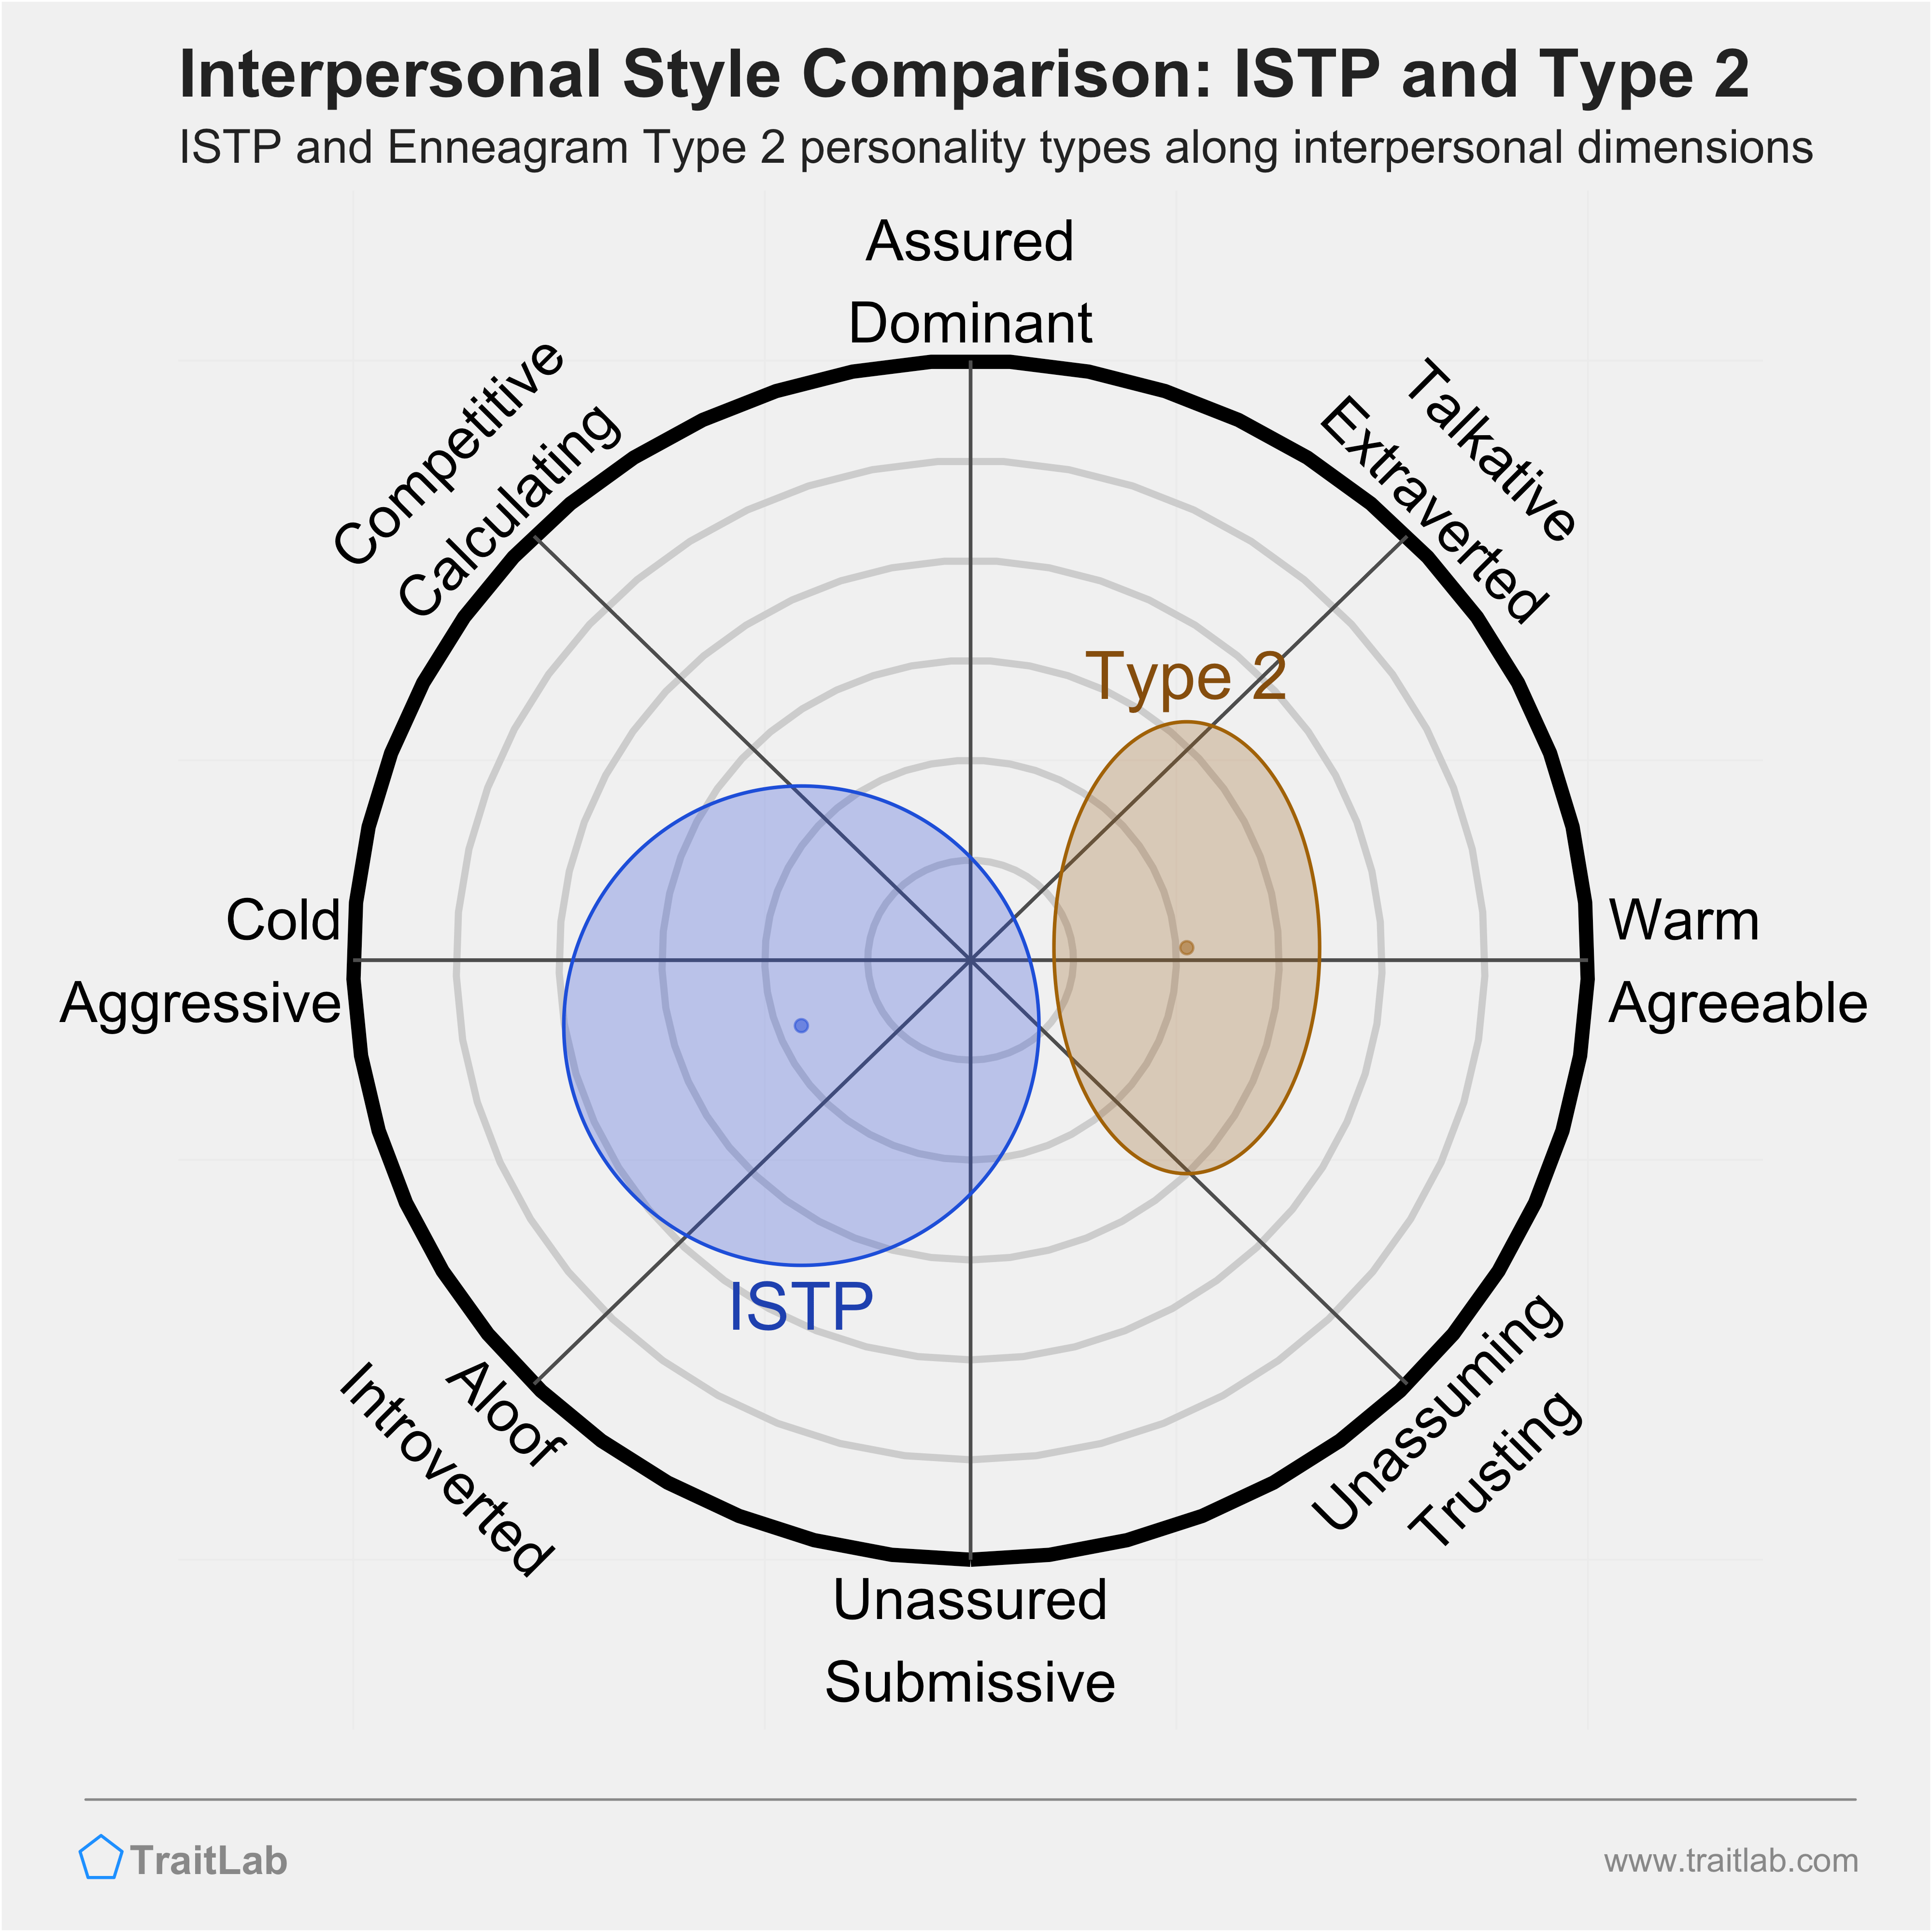 Enneagram ISTP and Type 2 comparison across interpersonal dimensions